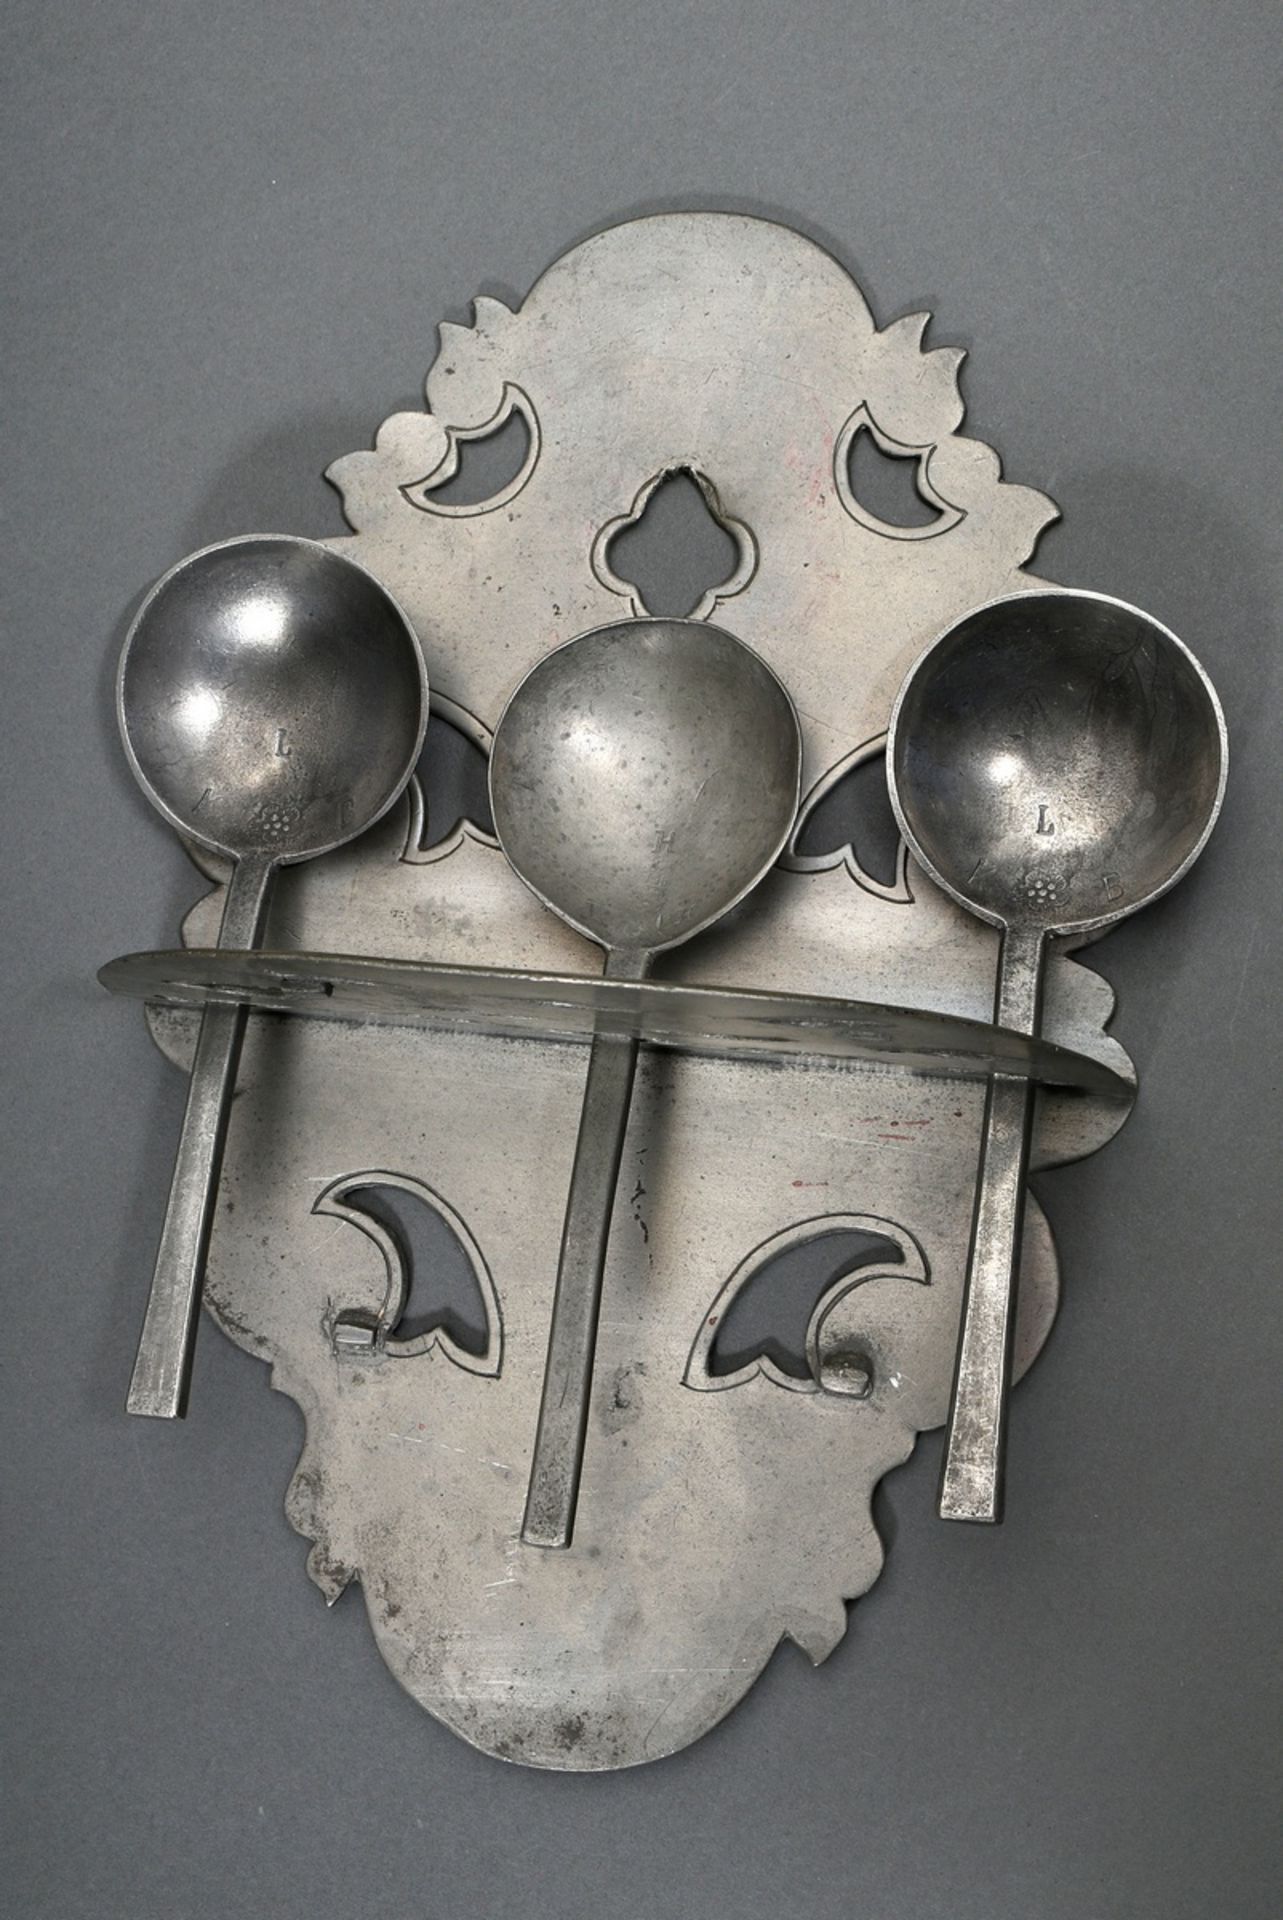 Pewter spoon board in openwork shield form with 12 slots, MZ indistinct, end of 18th century, 31x20